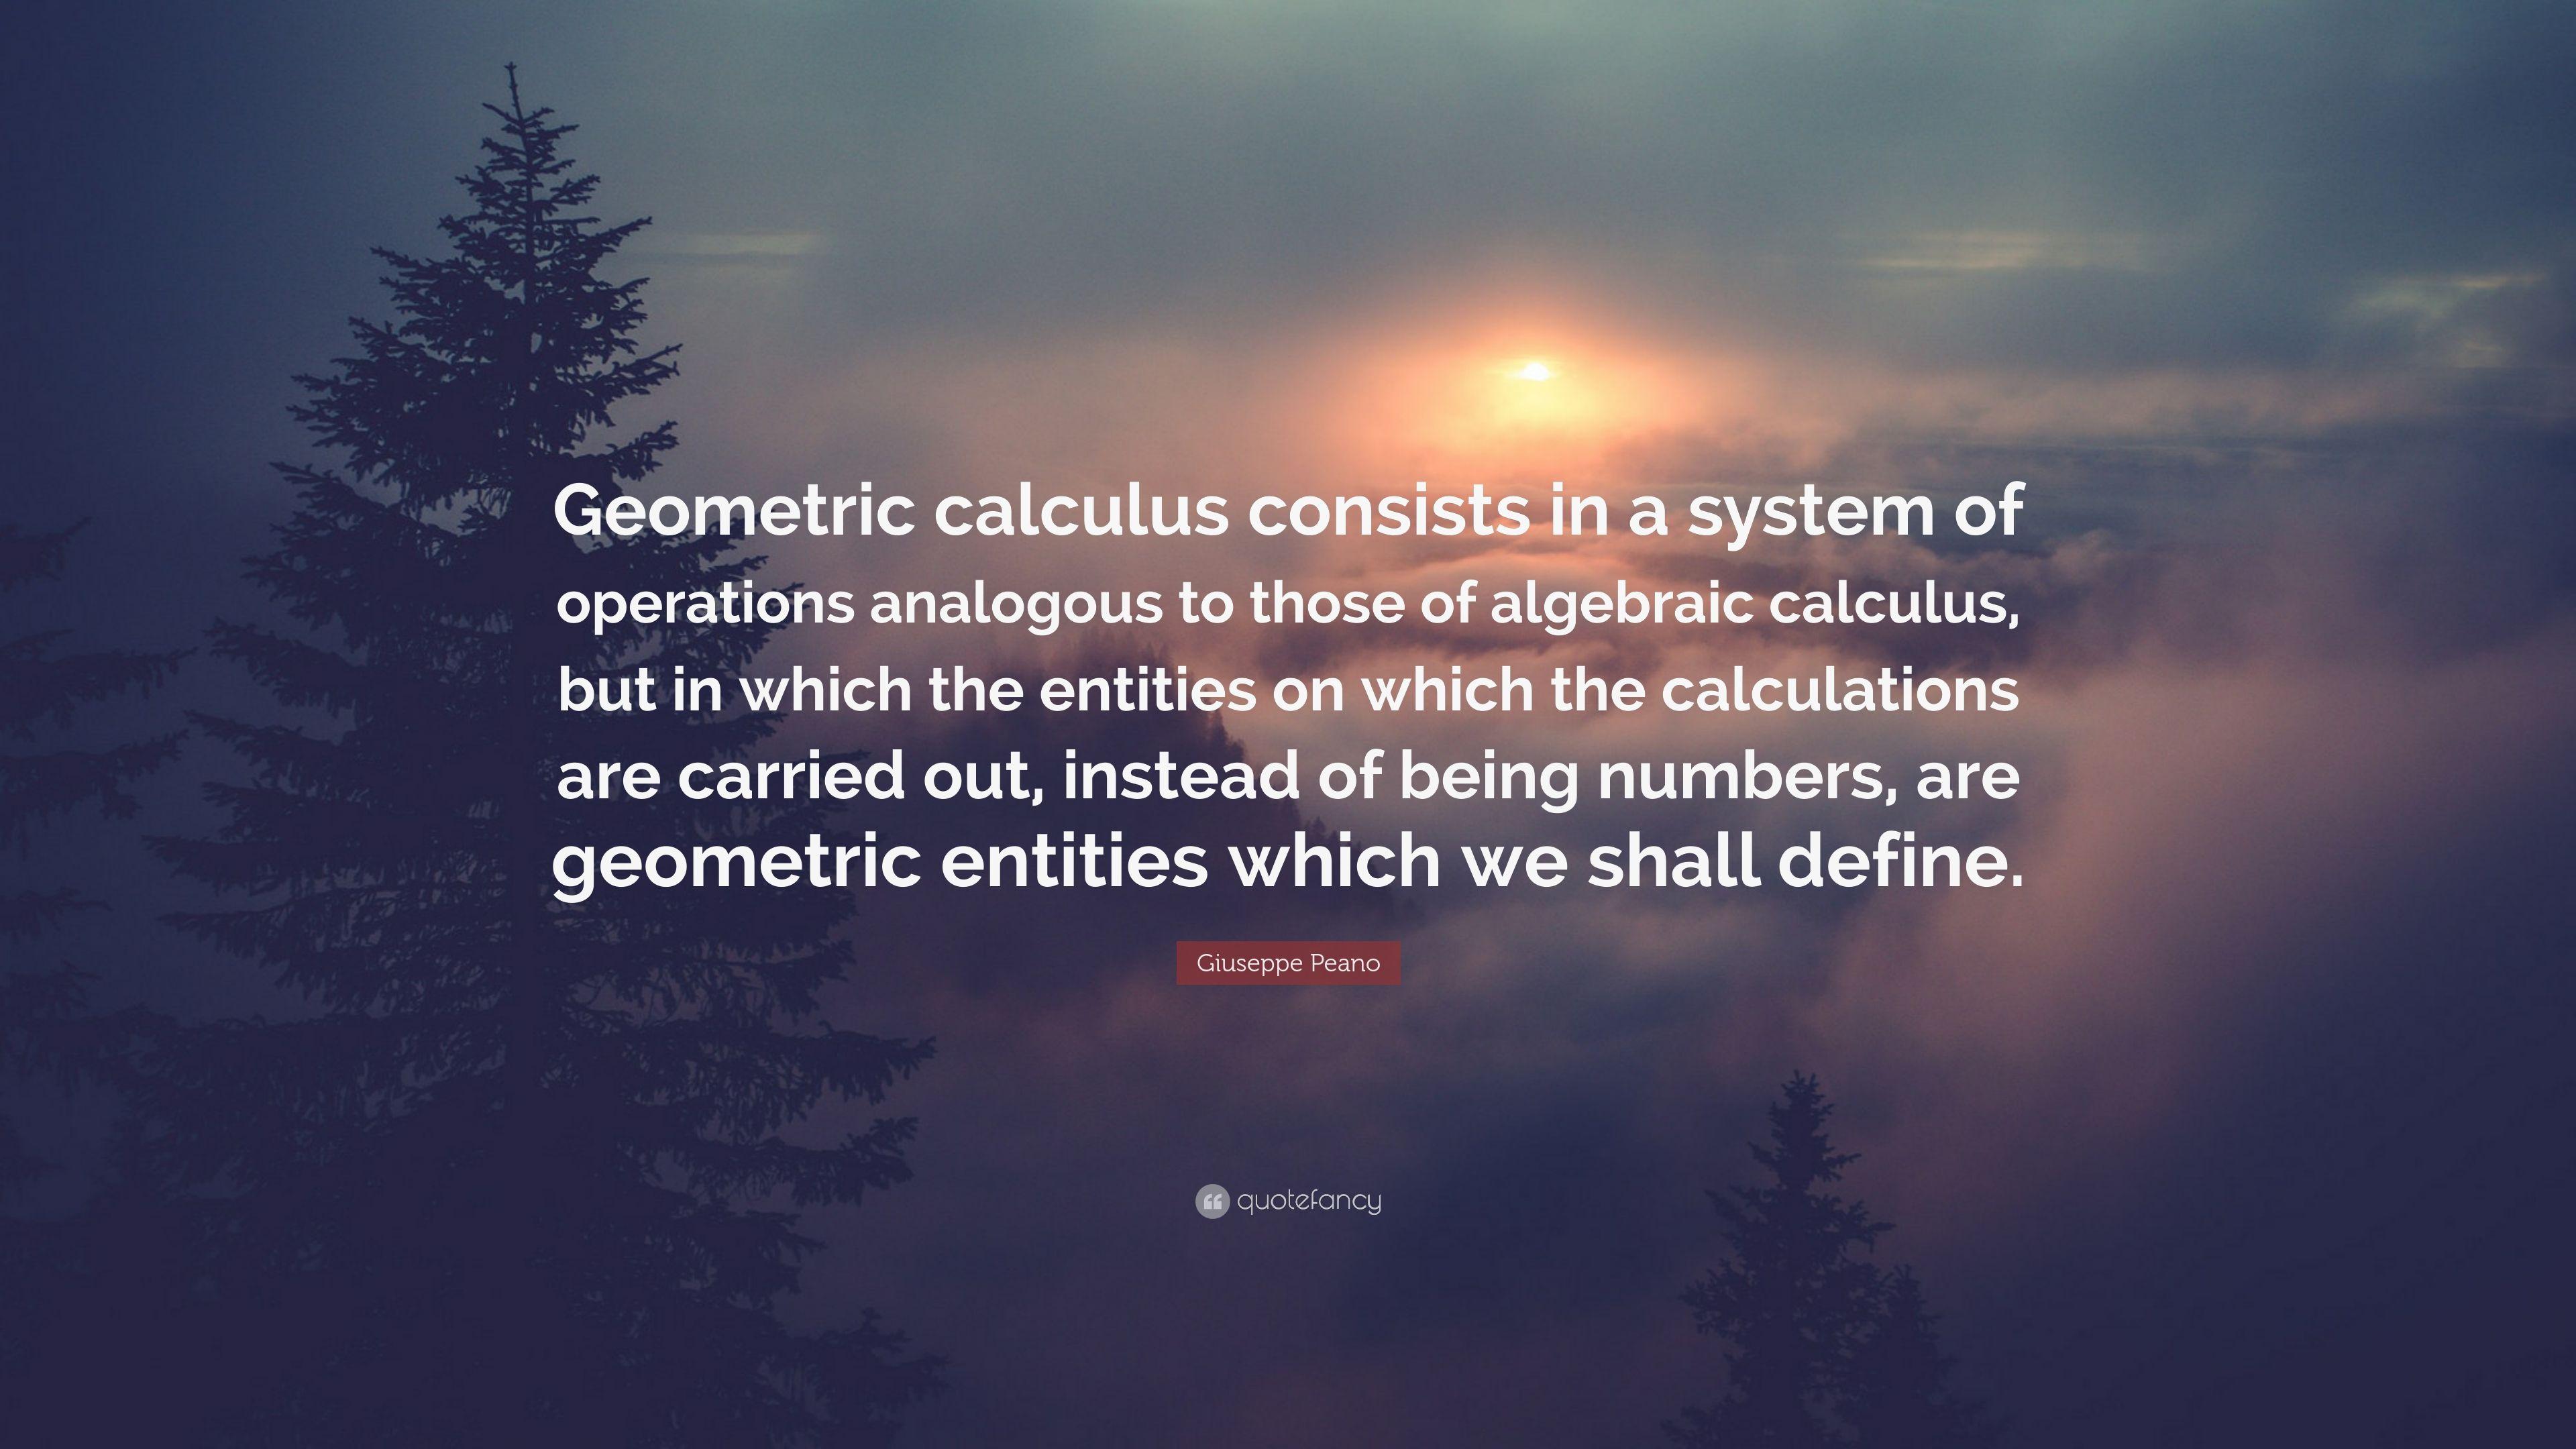 Giuseppe Peano Quote: “Geometric calculus consists in a